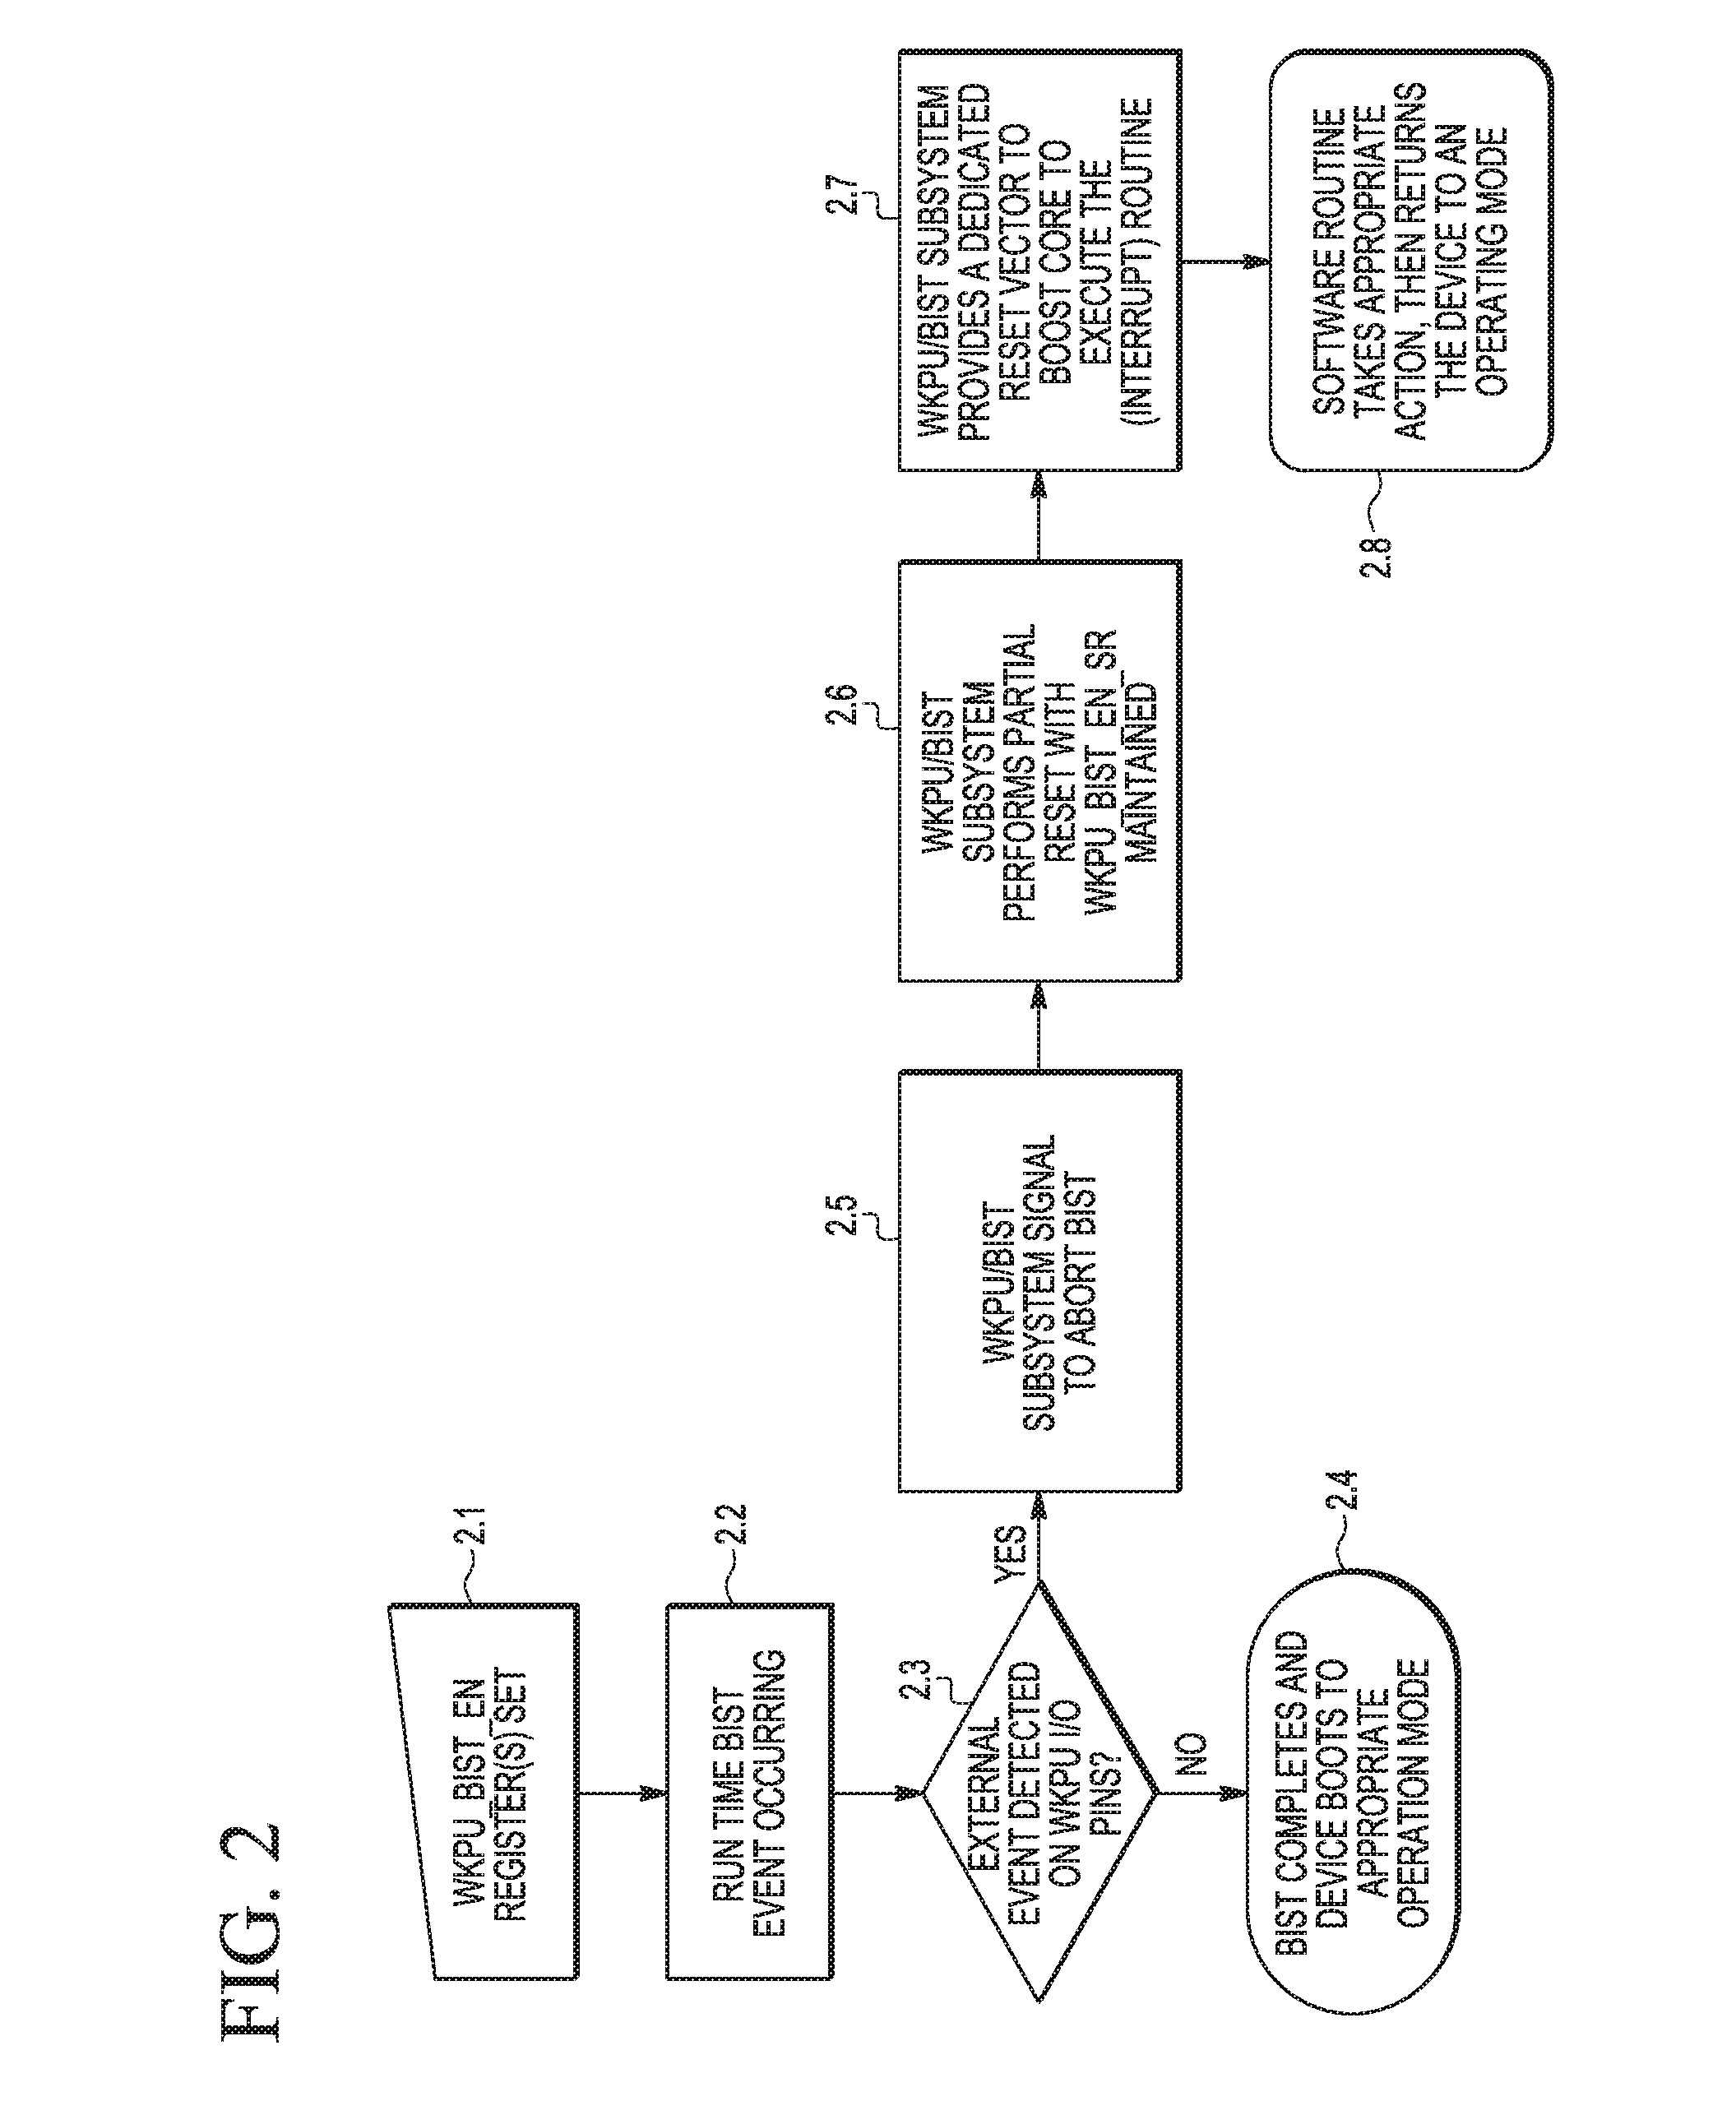 Data processing device and method of conducting a logic test in a data processing device